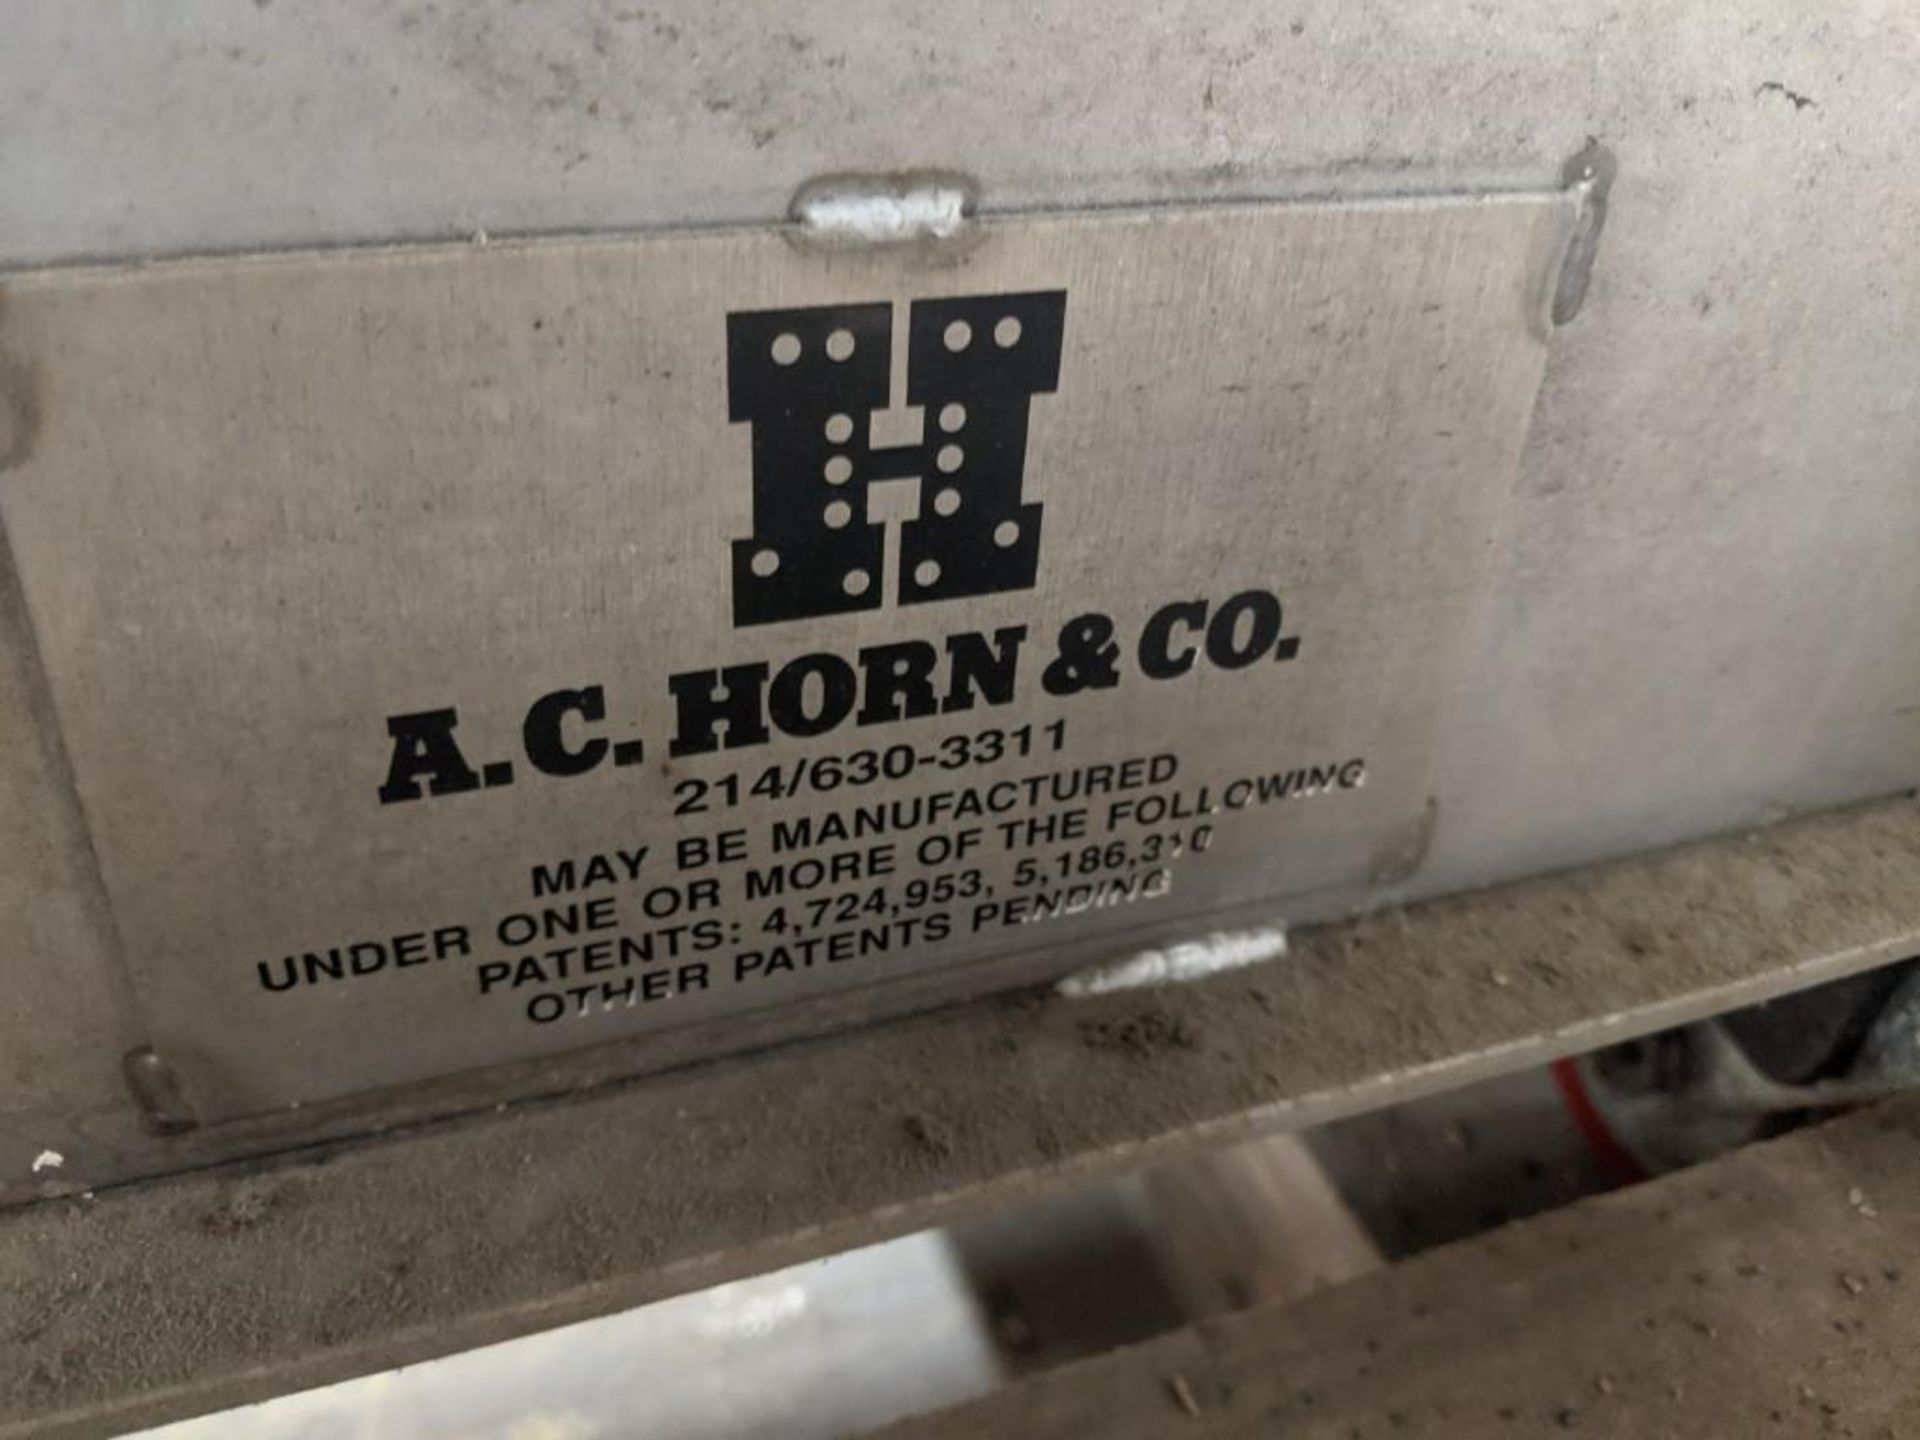 AC Horn Single Lane Collator 10 Inches Wide - Image 17 of 17